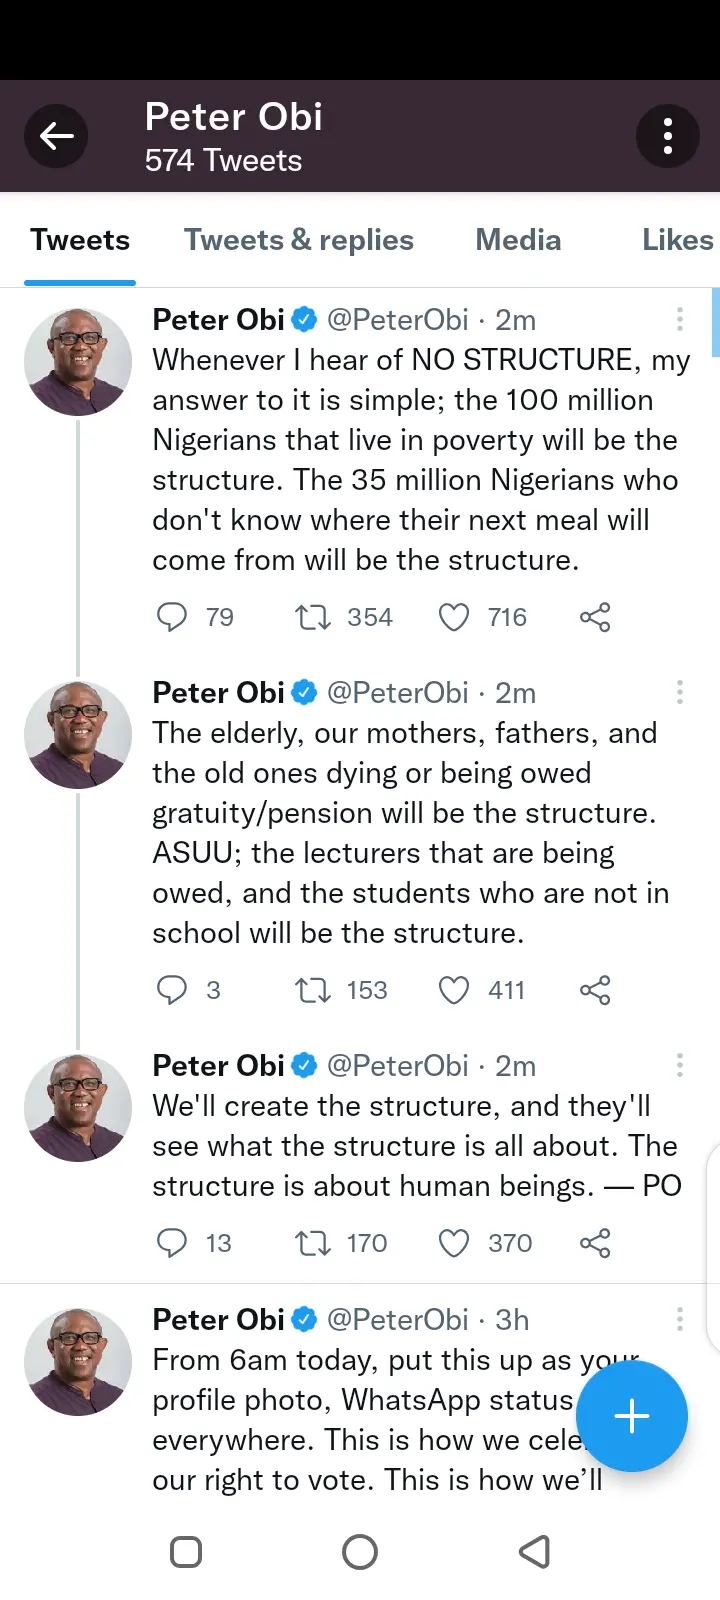 Those Who Lives in Poverty Will Be Structured, If I am Elected President In 2023 - Peter Obi